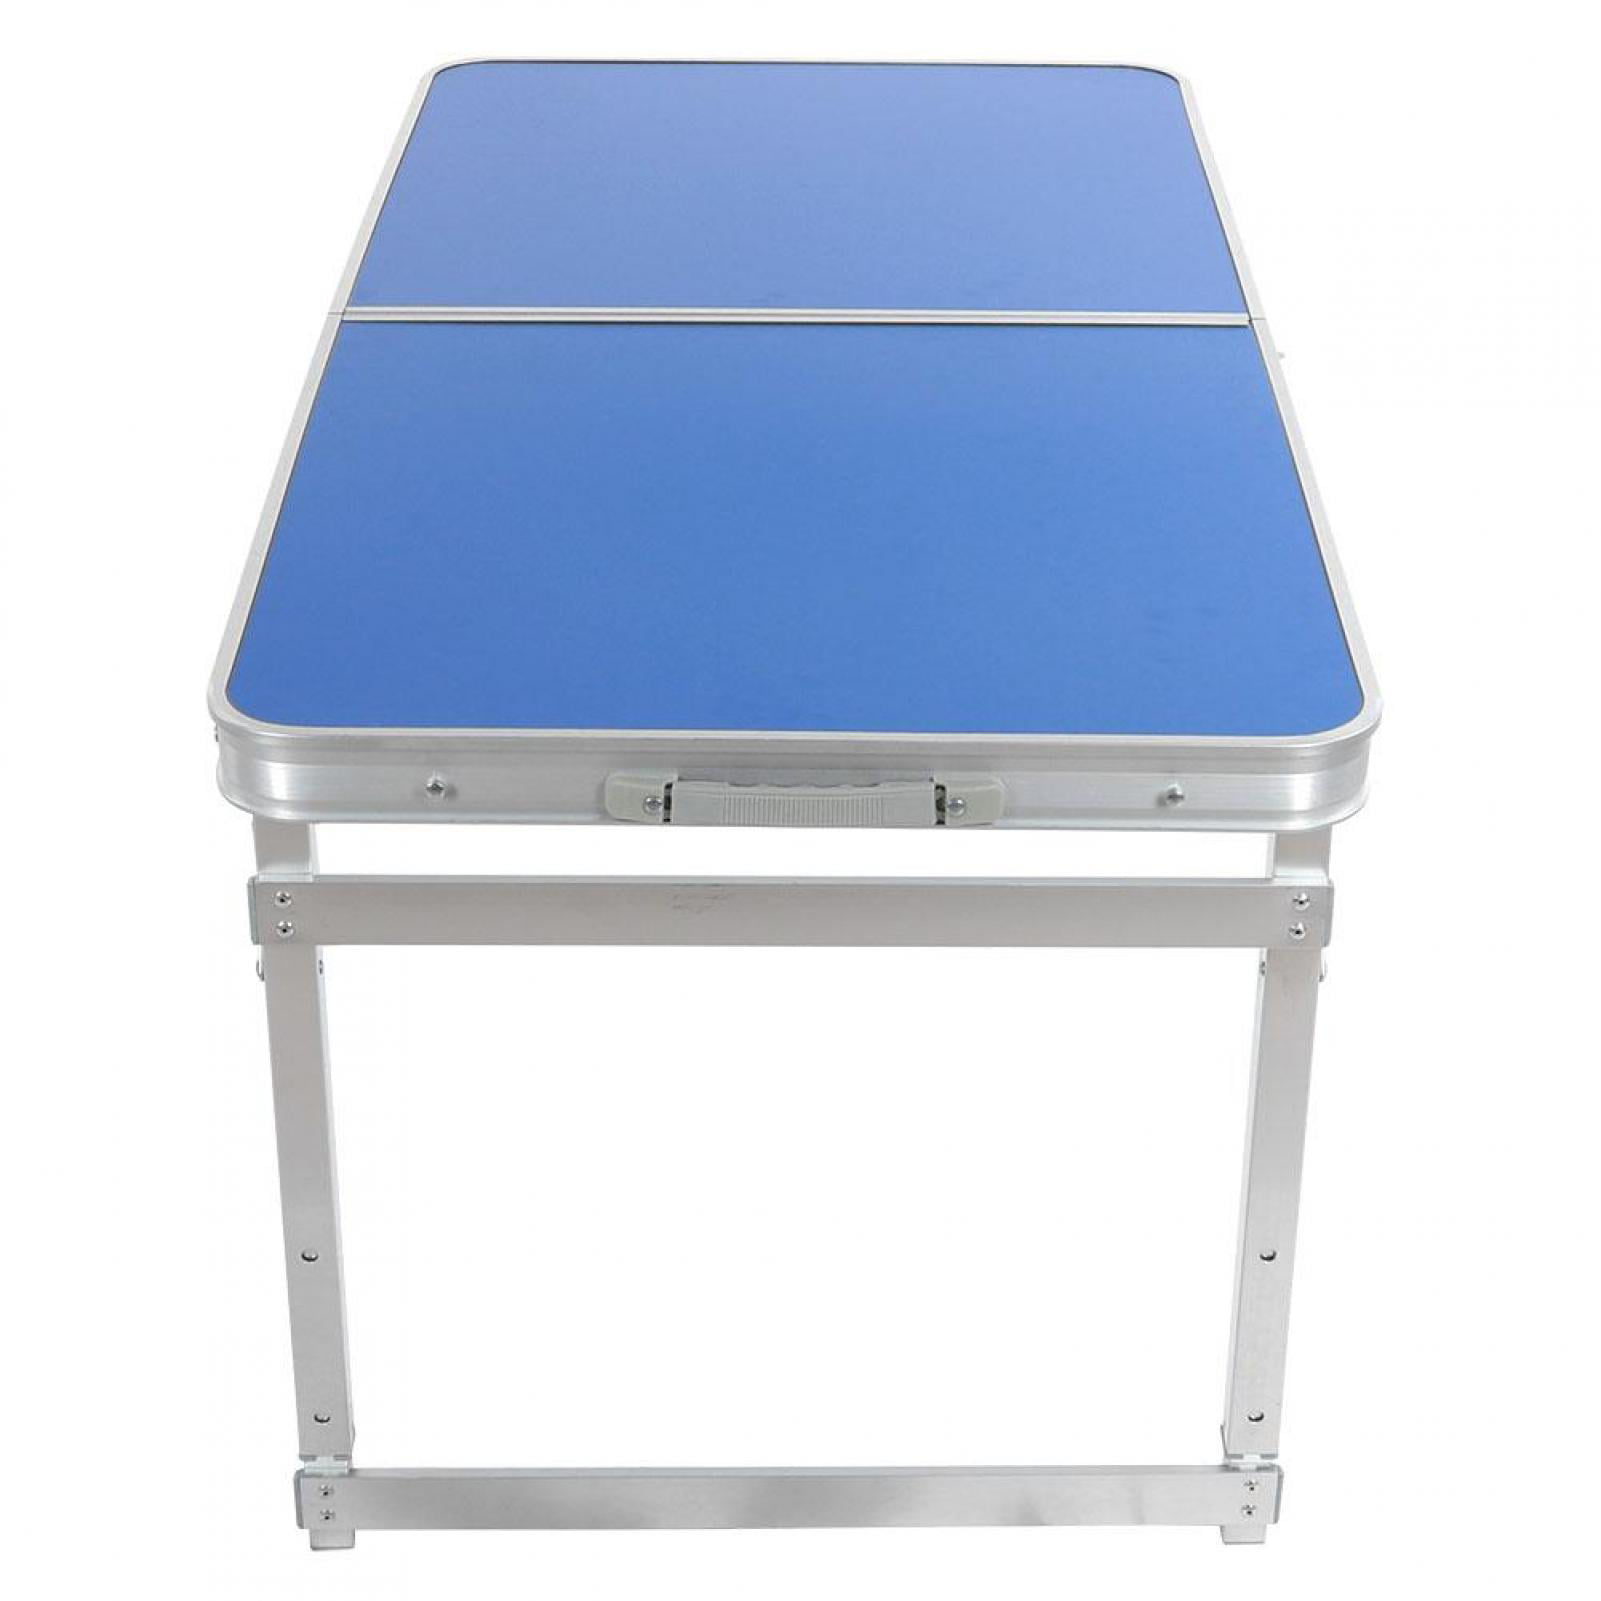 Picnic Tables,Outdoor Camping Folding Square Foot Aluminum Table Rectangular Portable Table Staight-Sided 120x60cm